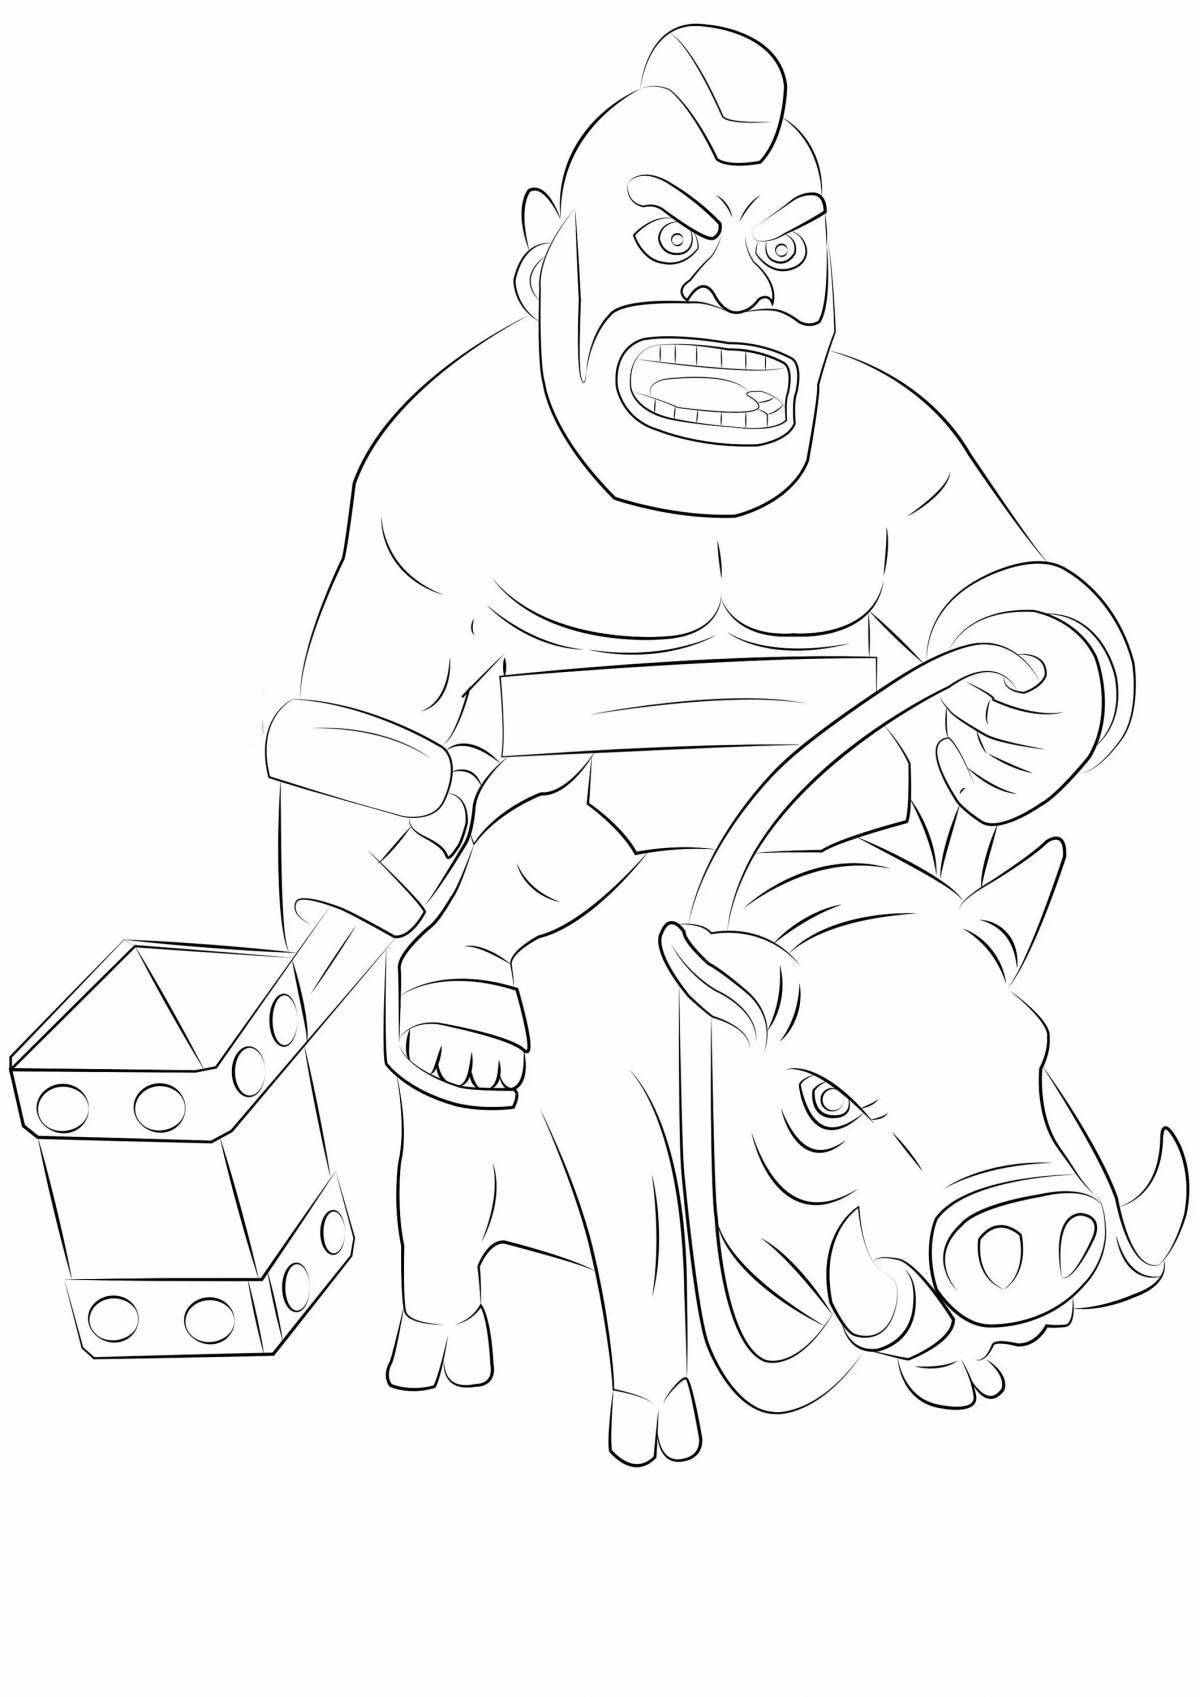 Awesome clash royale coloring page